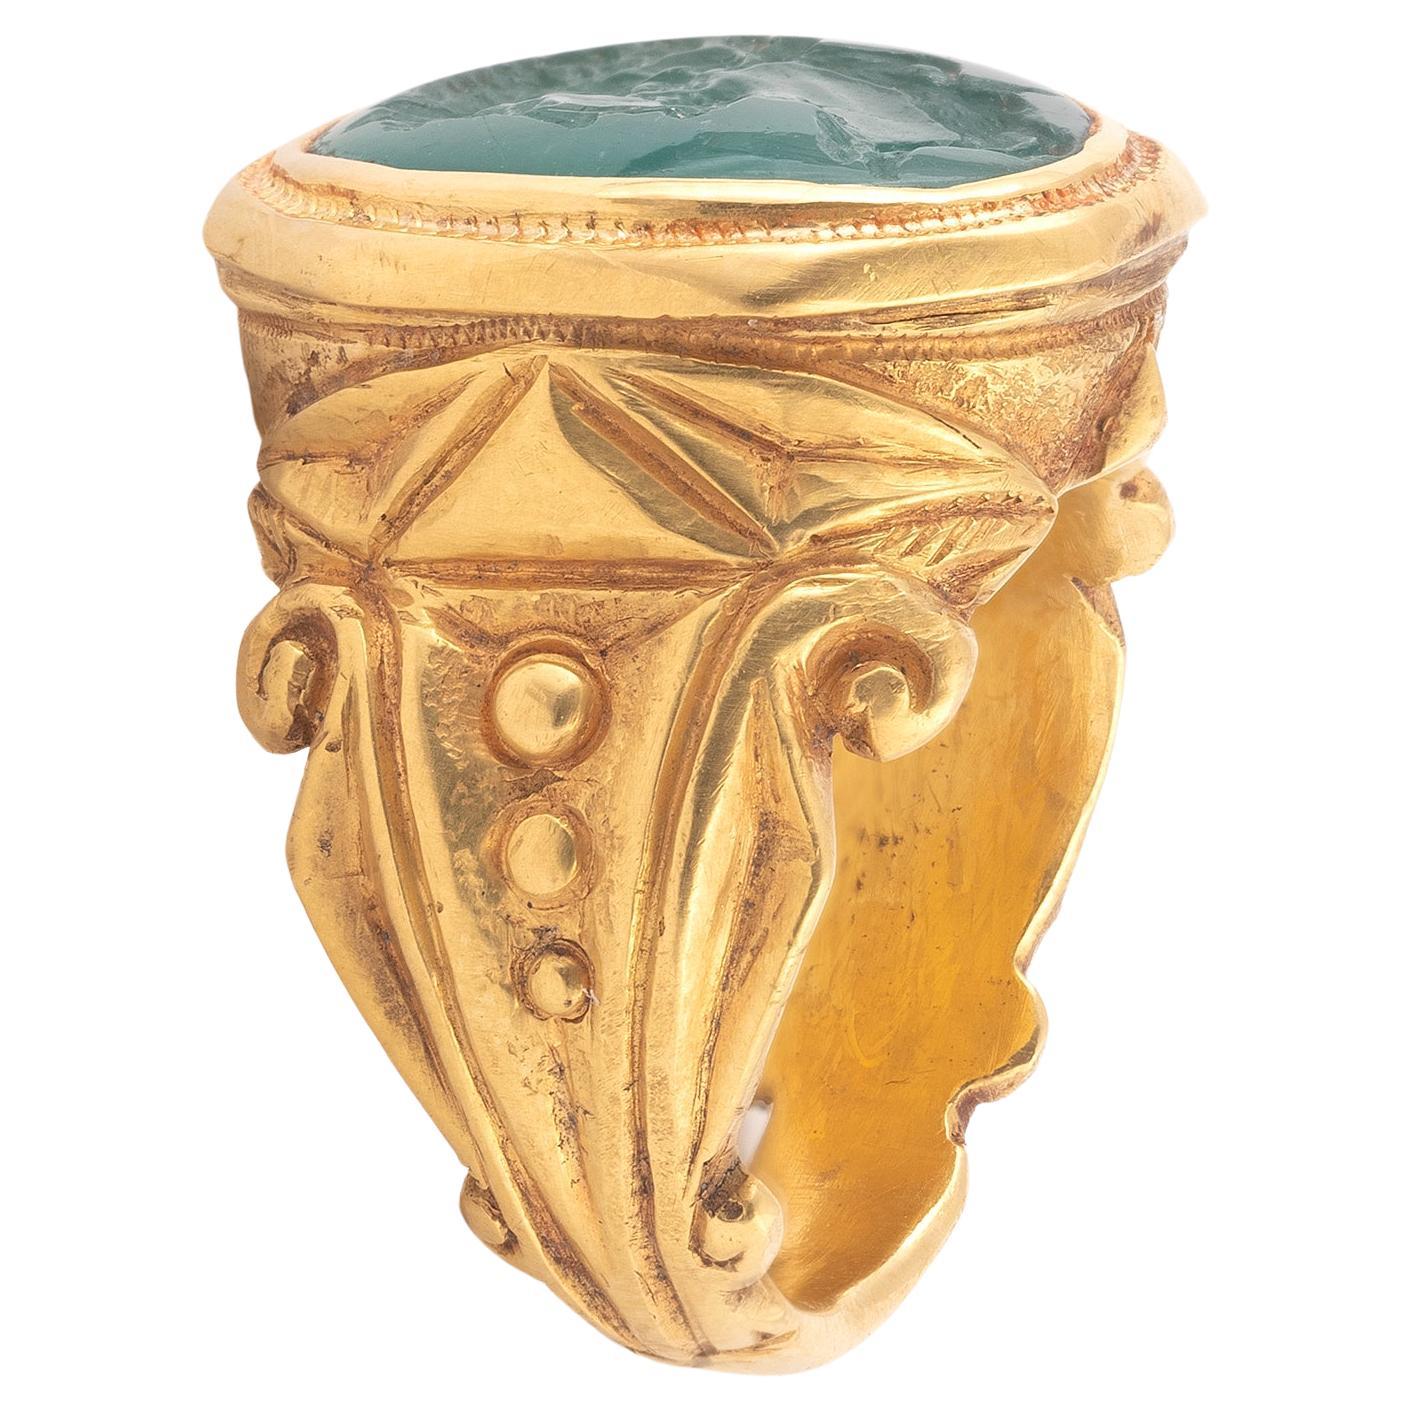 A Neoclassical carved emerald intaglio, depicting Roman Emperor Hadrian, the oval emerald 1.5cm high, mounted in a later gold ring, size 8 1/2